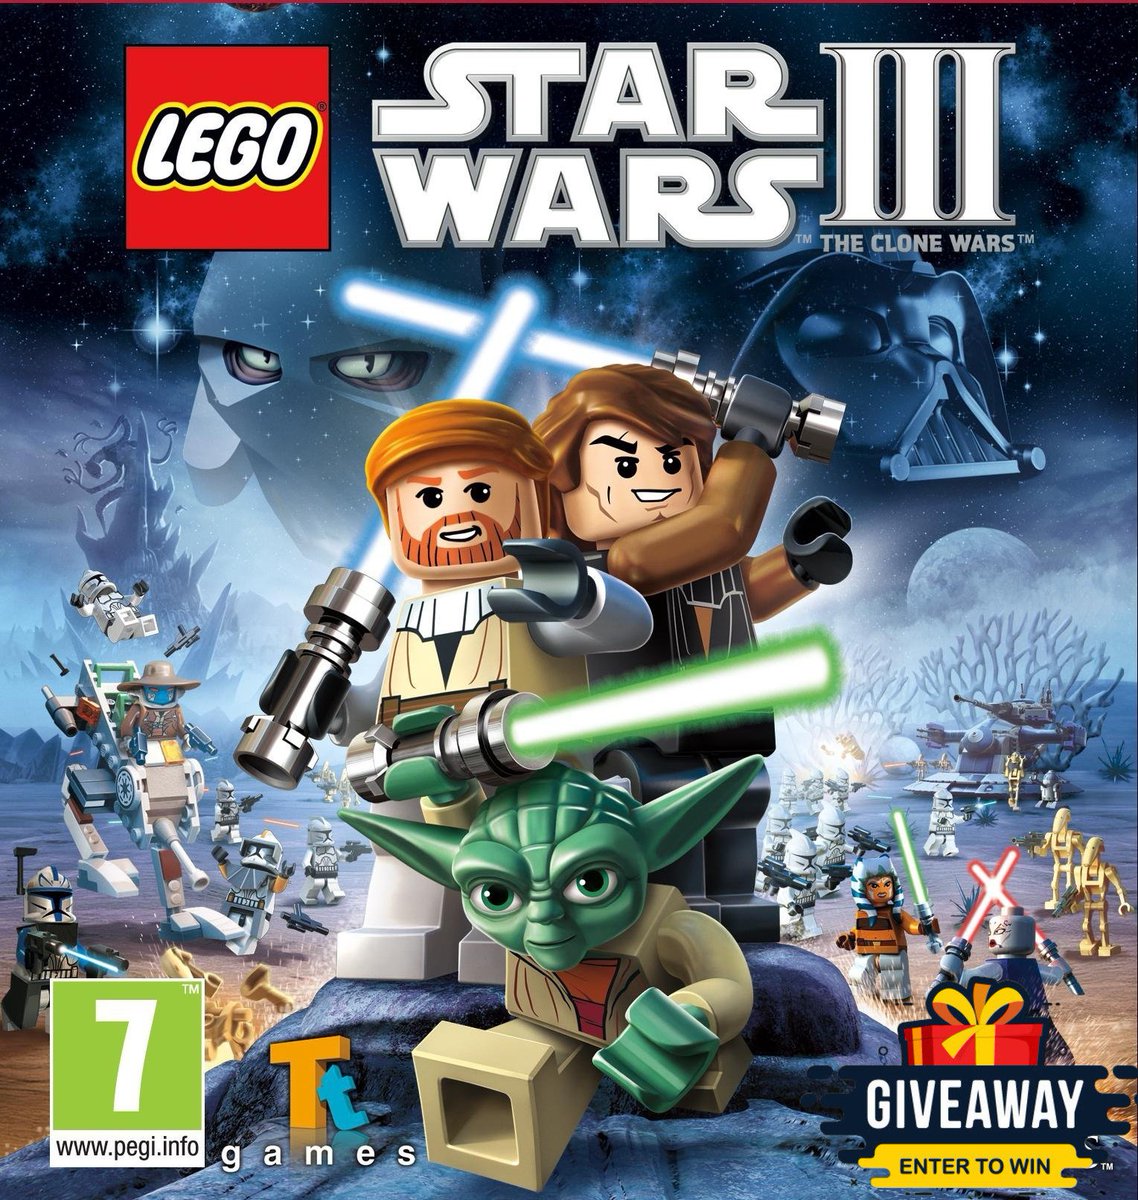 #Giveaway - 'LEGO Star Wars III: The Clone Wars' GOG Game

How to enter:👇
✅Follow Me & @_KyleMB
🔁RT +❤️Like
🎮Wishlist on Steam:⬇️
store.steampowered.com/app/2166920?ut…
⏰Ends on May 7th
📧DM me to sponsor a giveaway like this
#Giveaway #FreeGames #GOG #GOGKeys #FreeGameKeys #Lego #StarWars